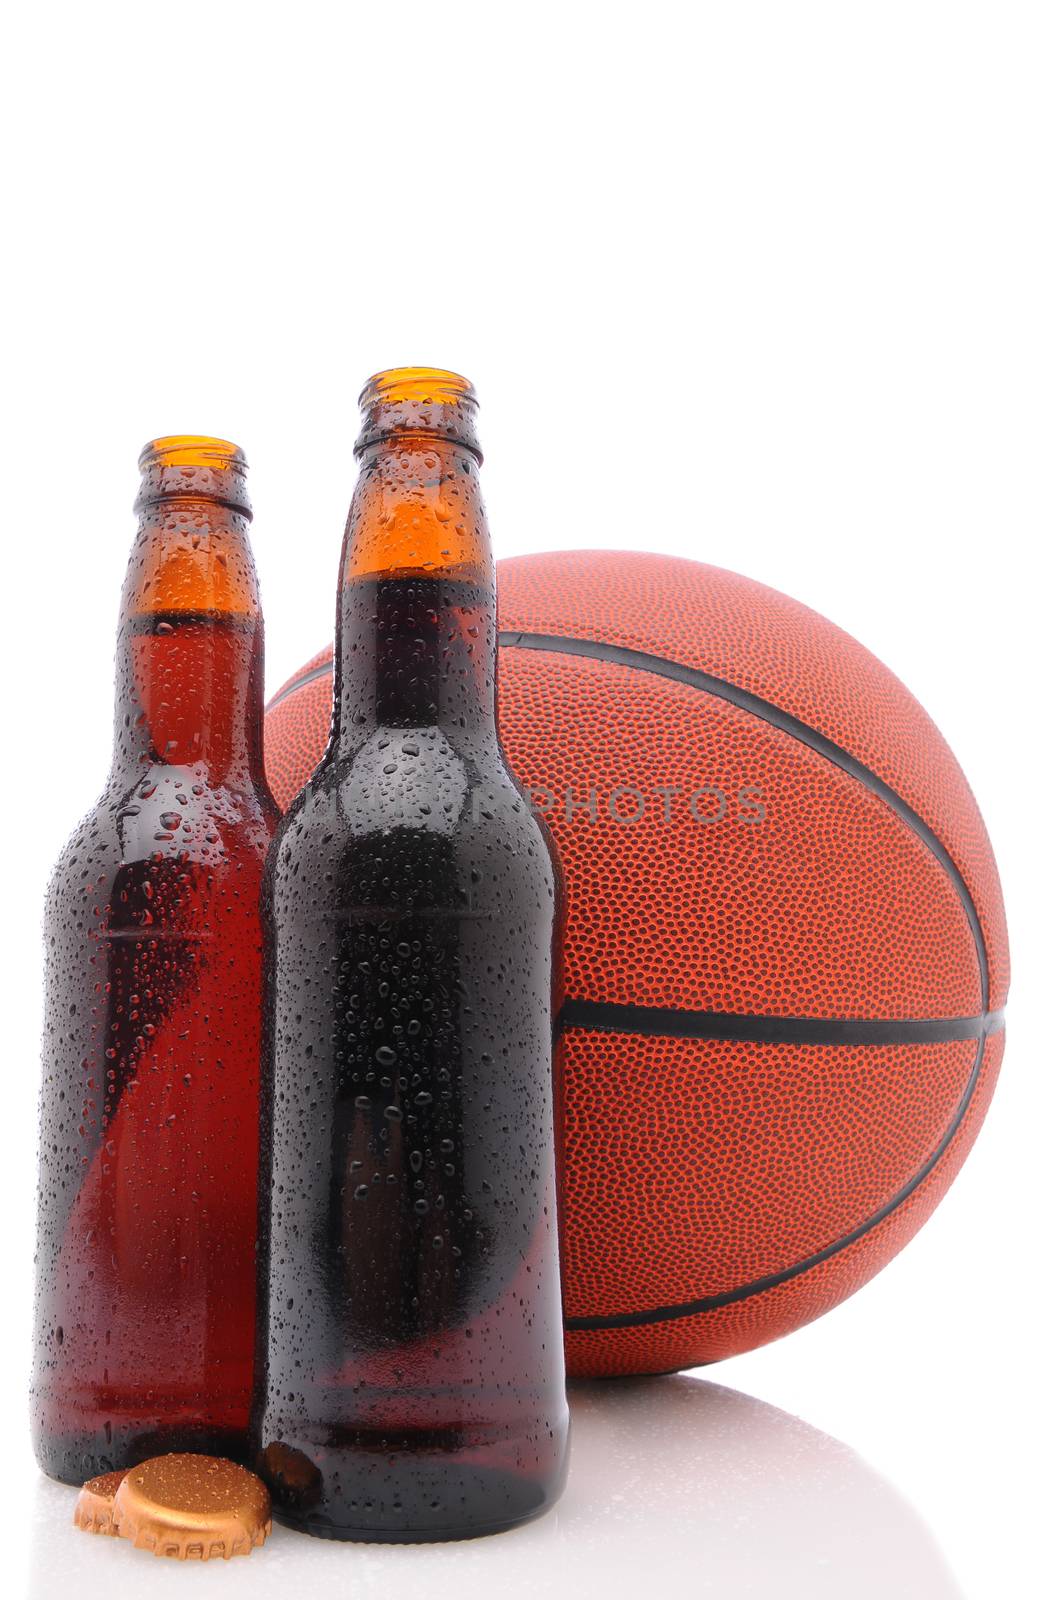 Two open beer bottles and a basketball on a white background with reflection. Vertical format from a low angle.